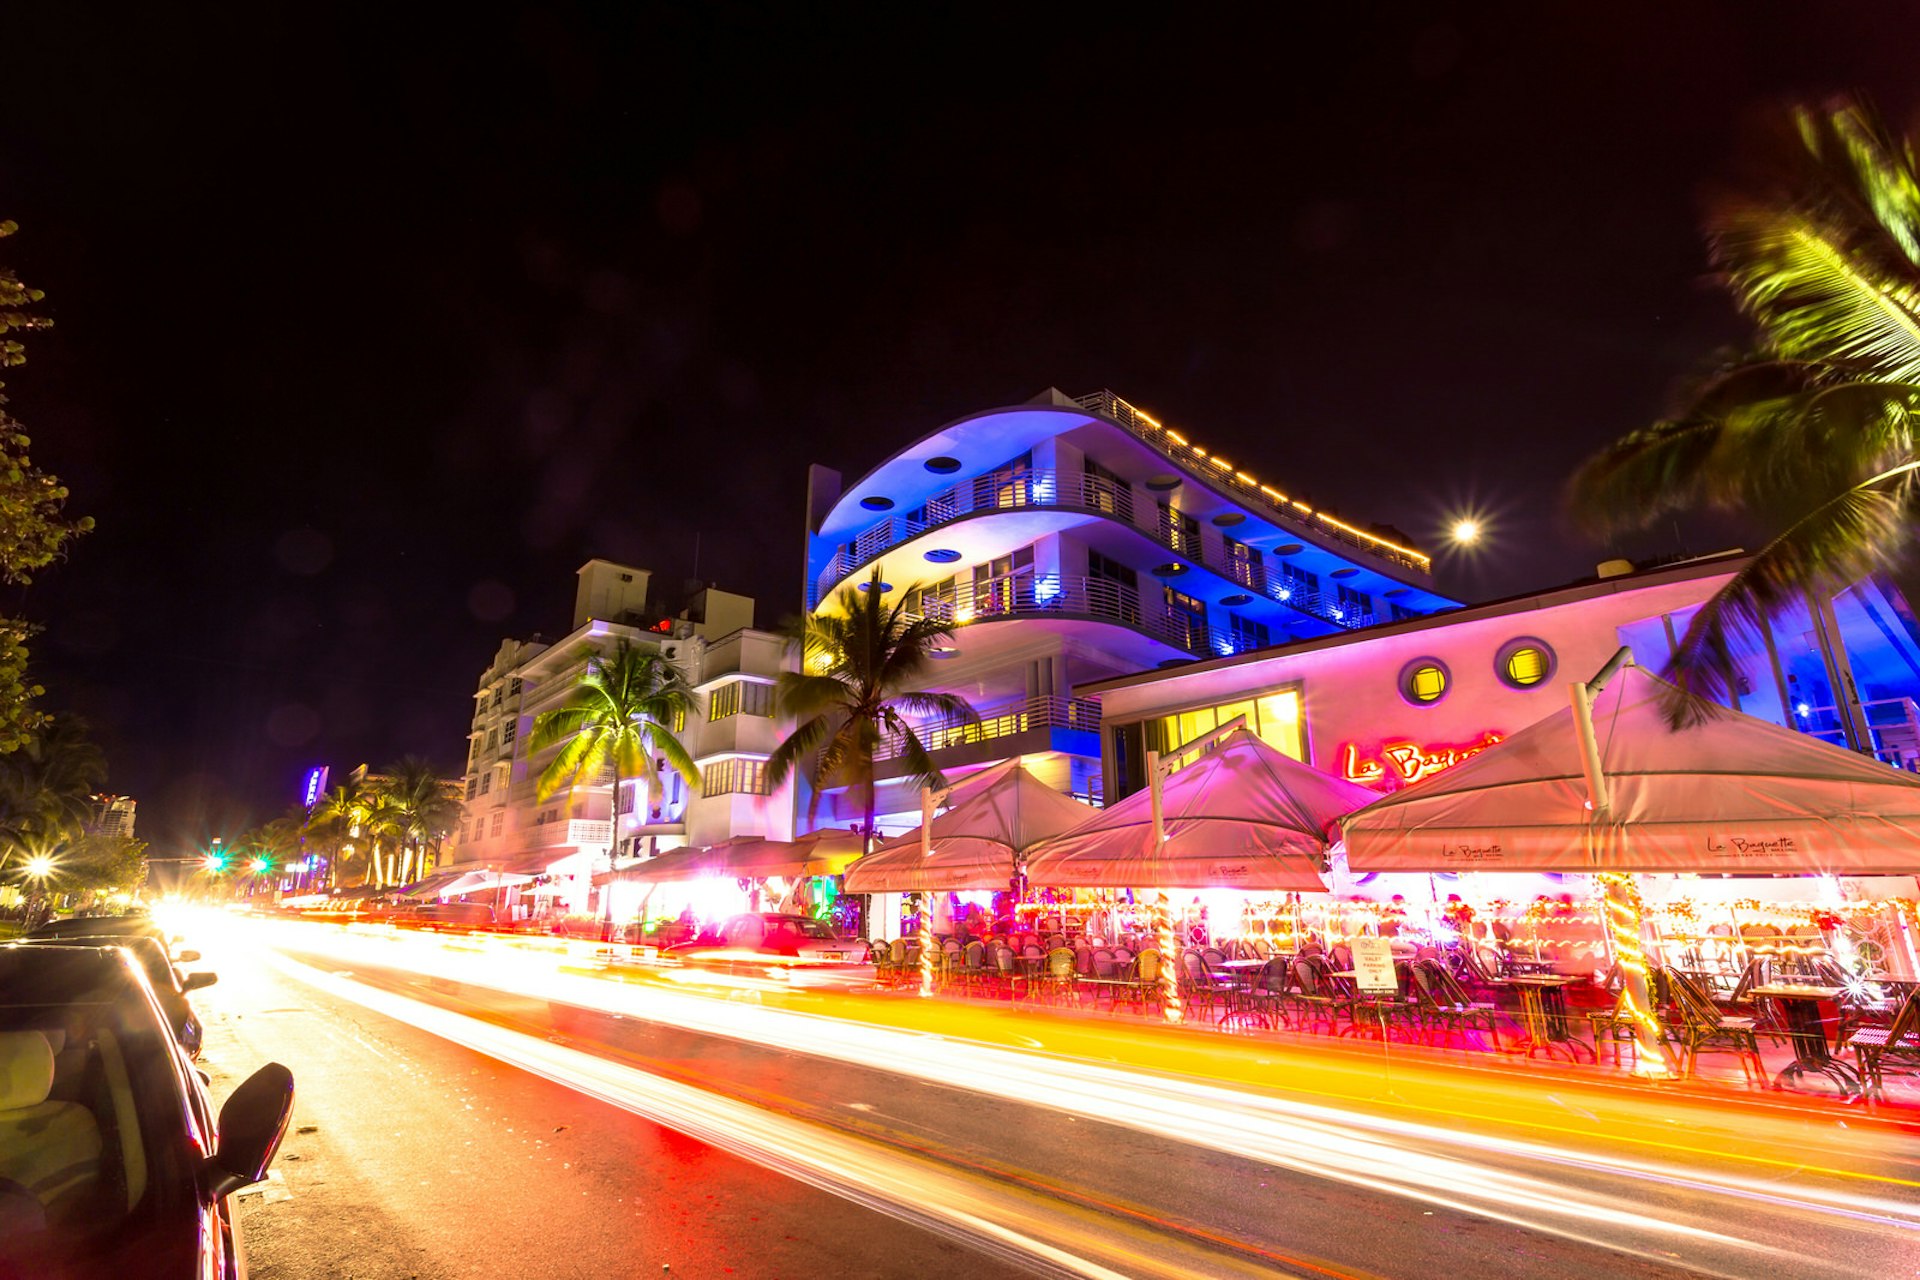 Ocean Drive scene at night with neon lights, palm trees, cars and people having fun © Pola Damonte / Getty Images